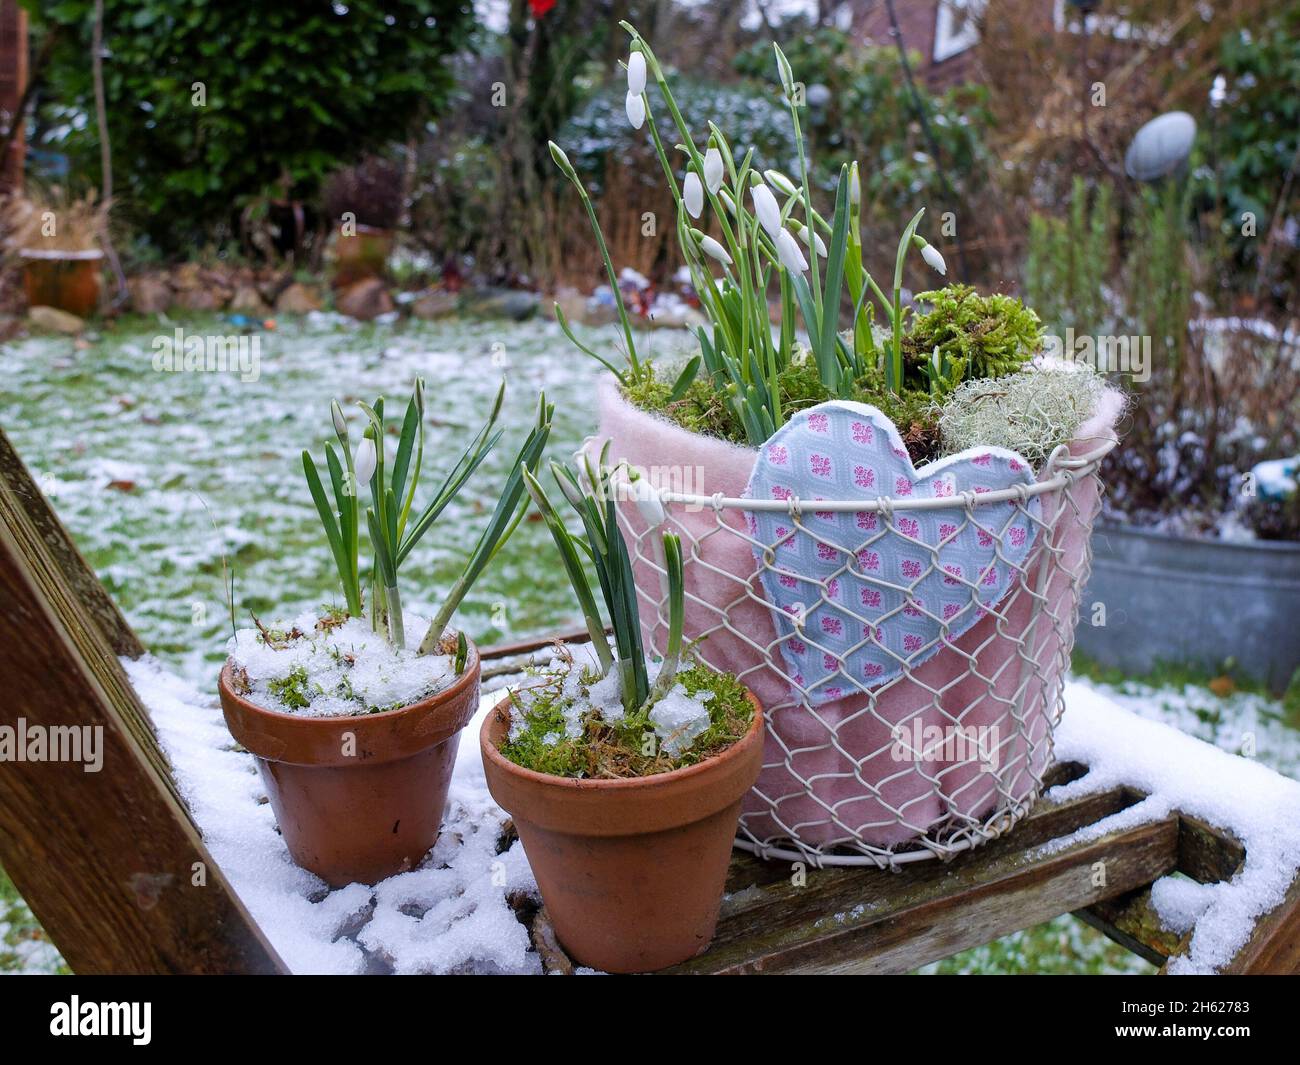 snowdrops (galanthus nivalis) in a pot Stock Photo